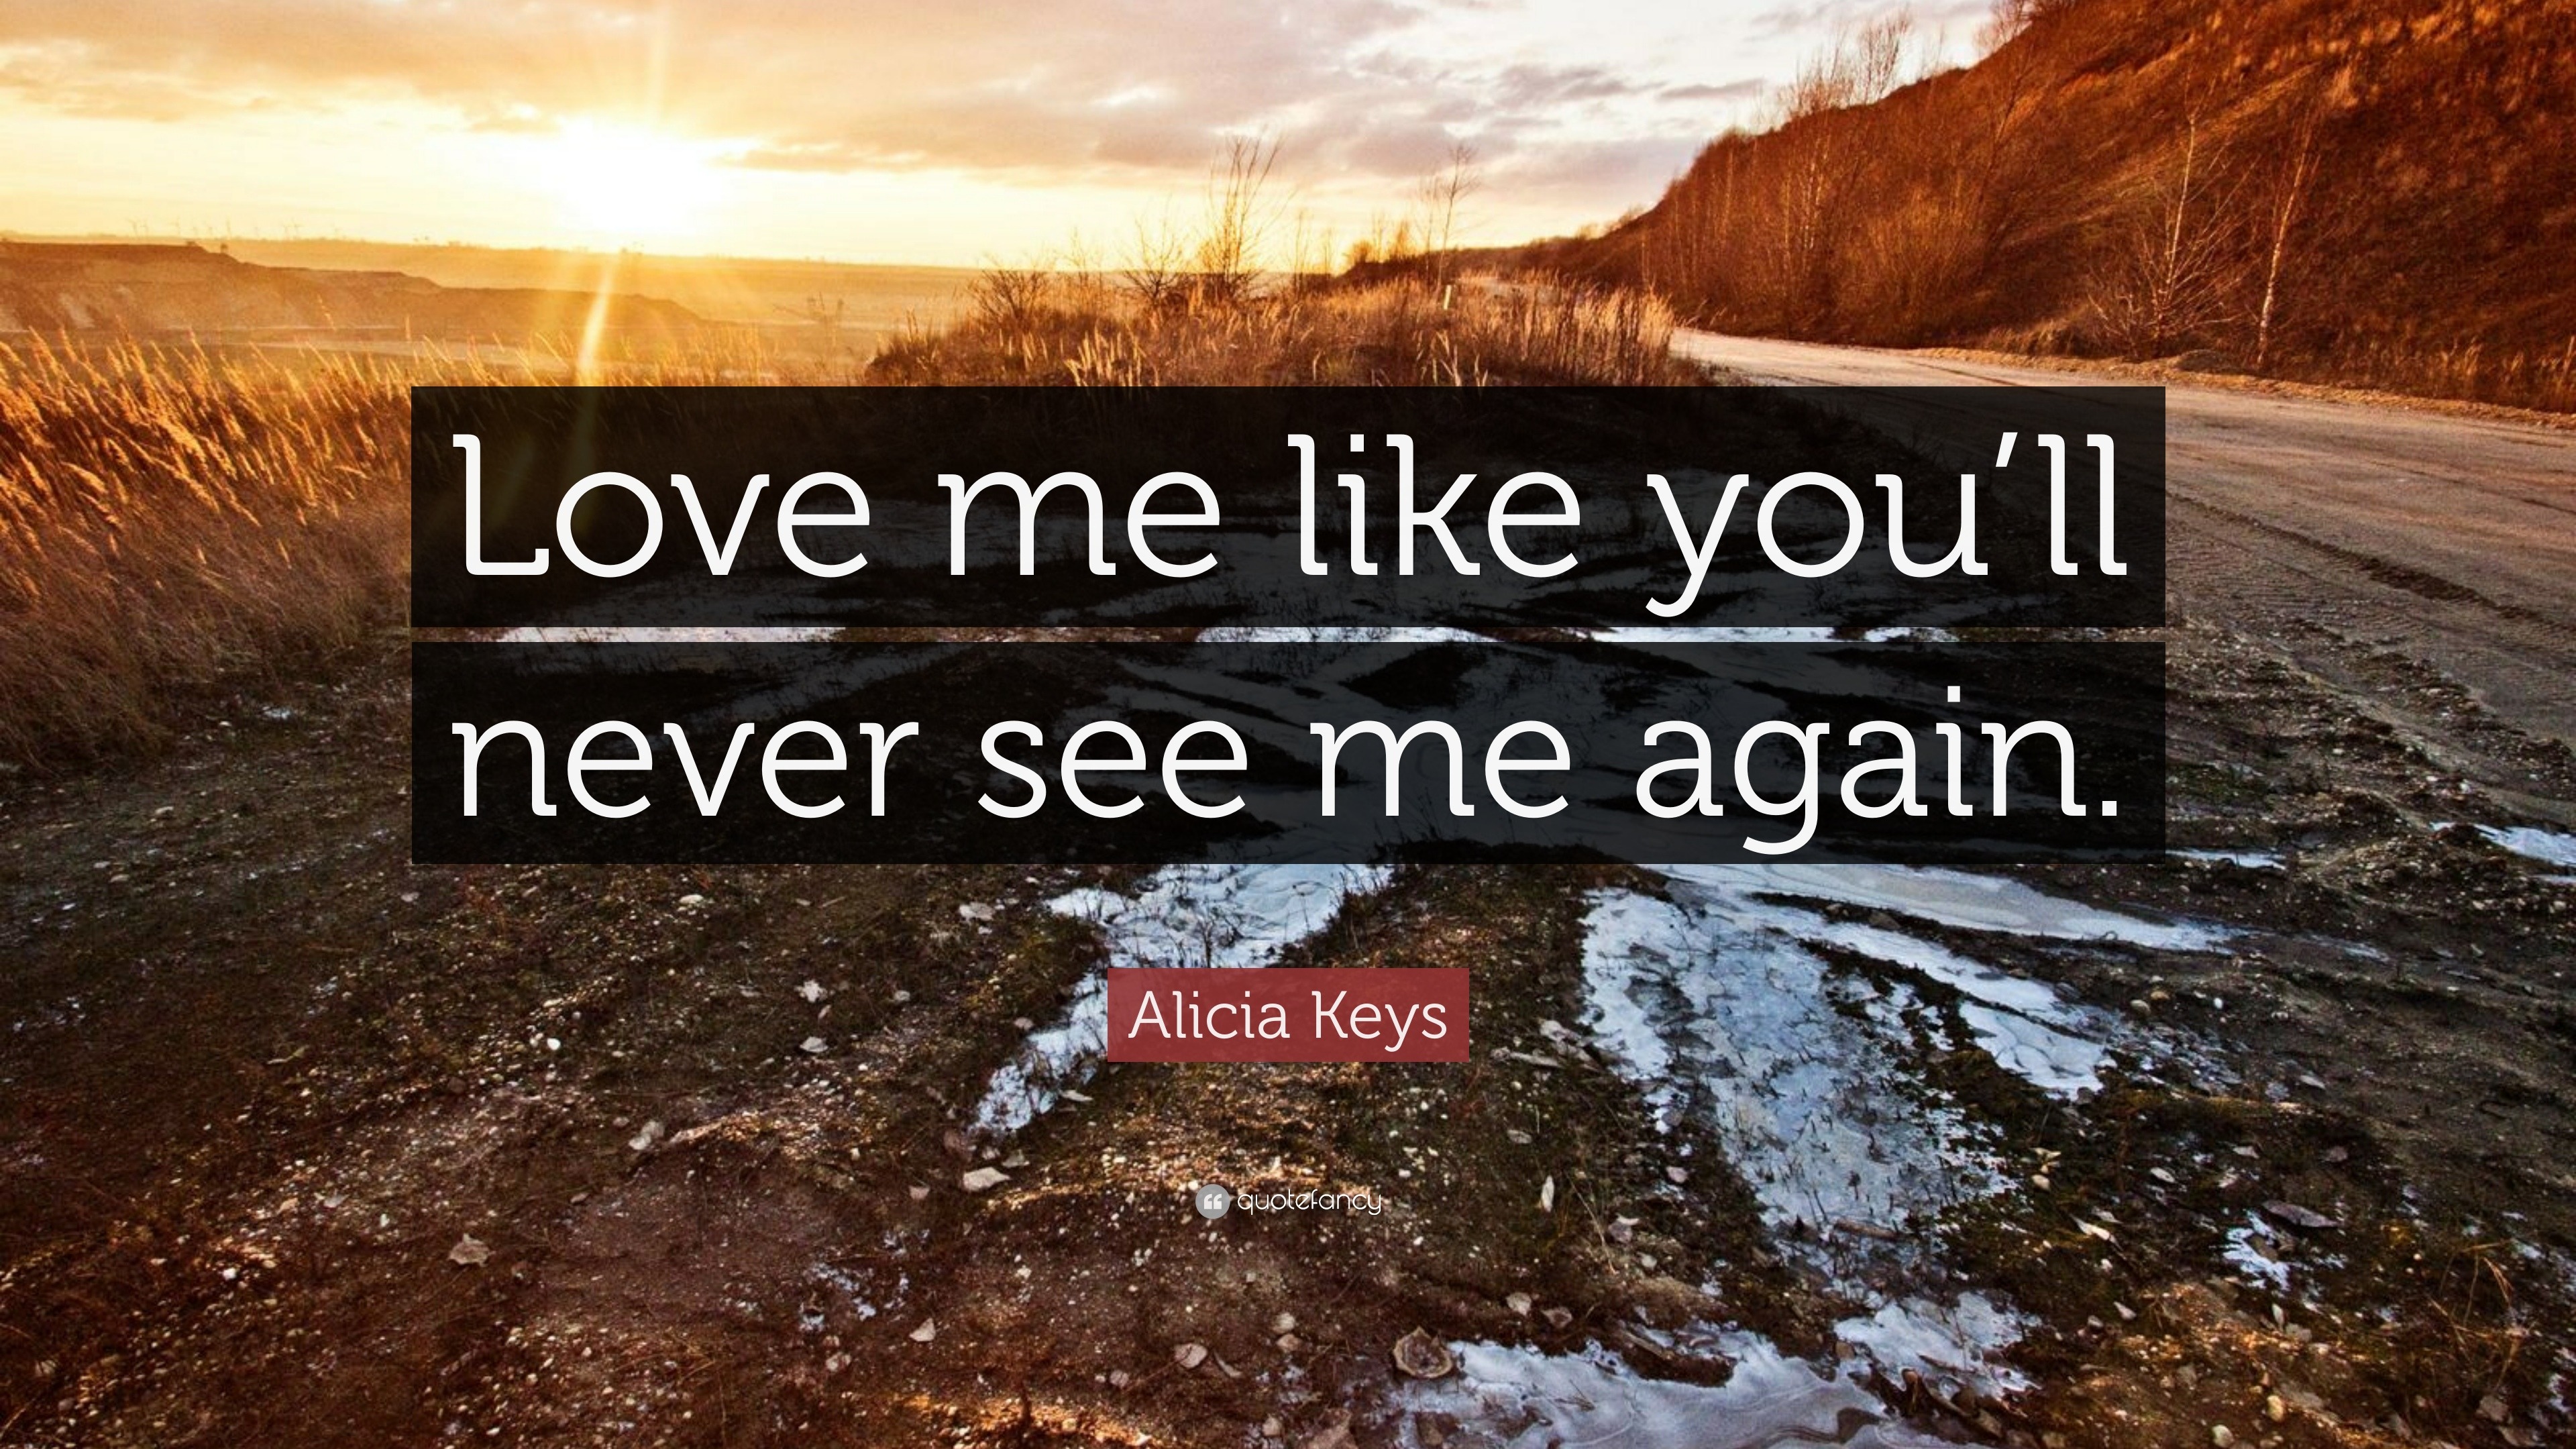 Alicia Keys Quote “Love me like you ll never see me again